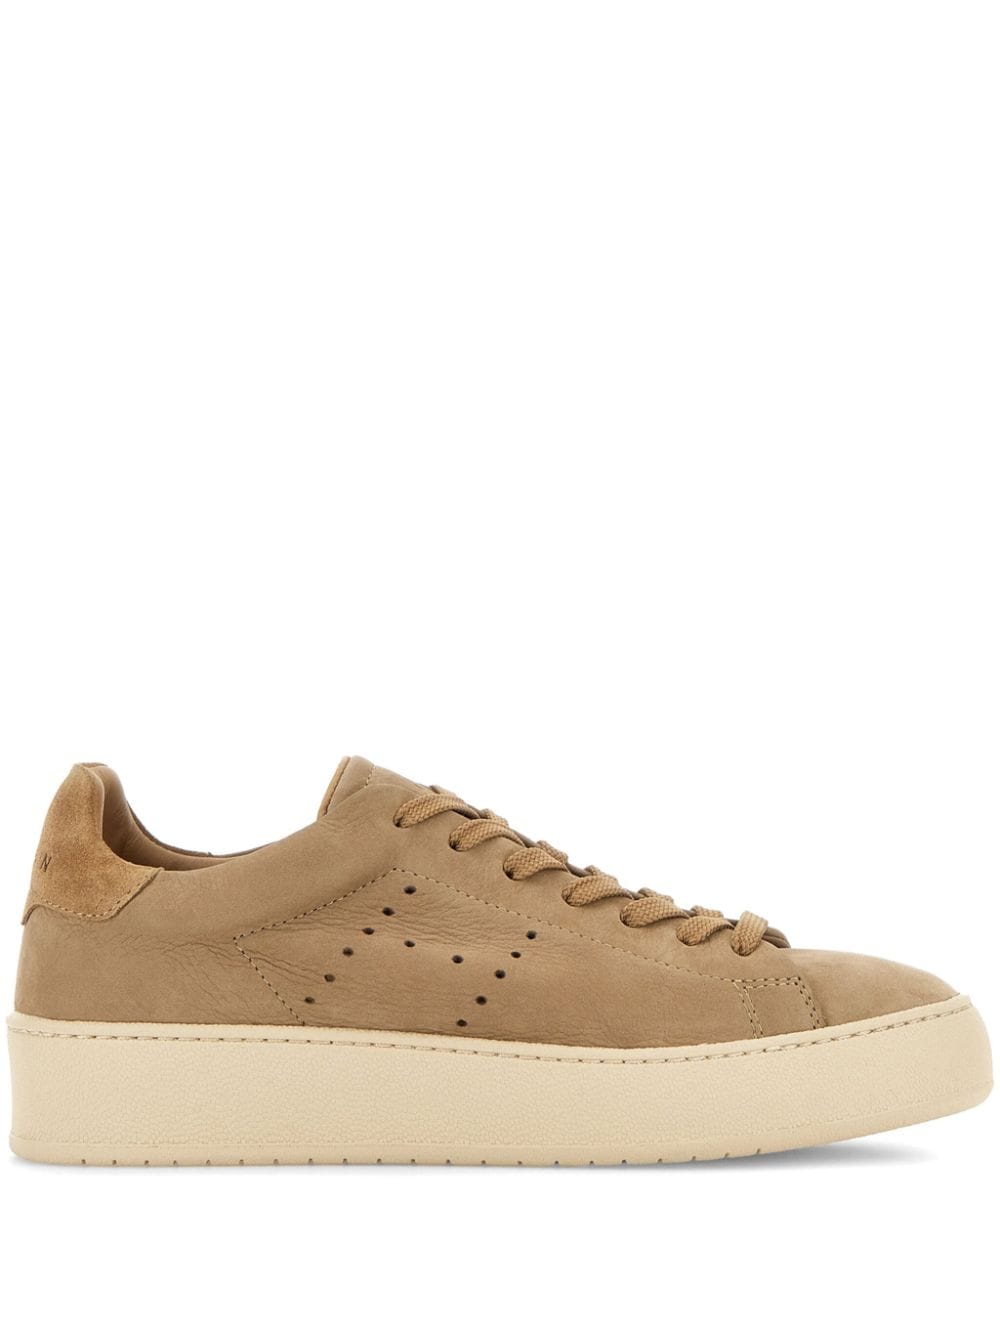 Hogan H672 Lace-up Leather Sneakers In Brown